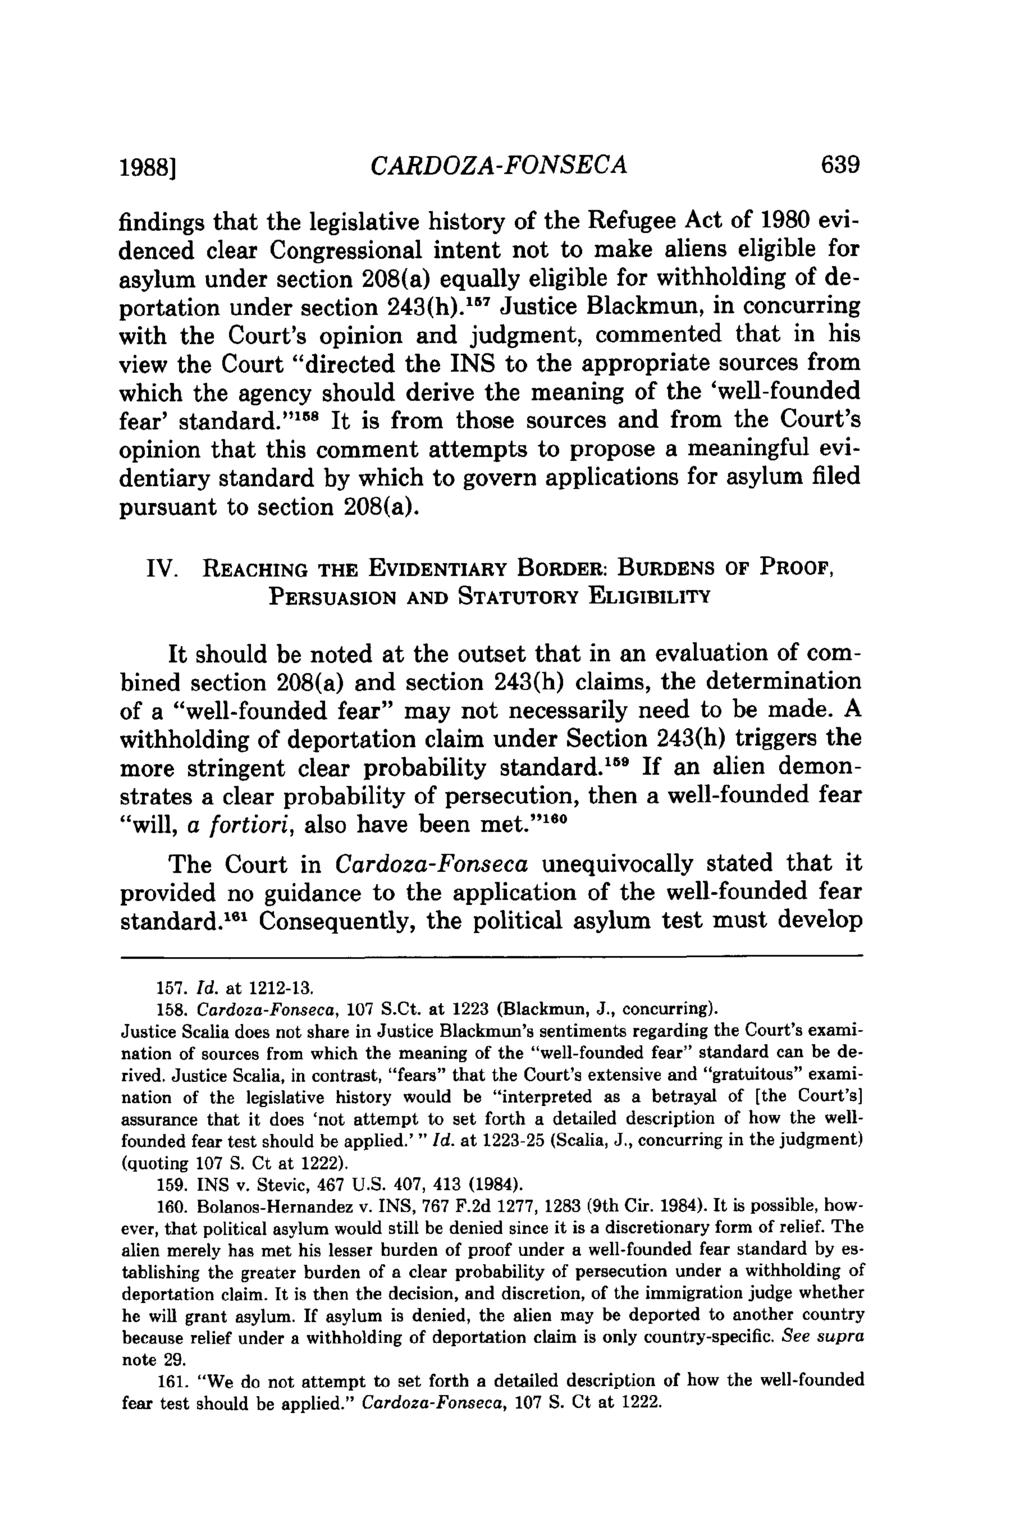 1988] CARDOZA-FONSECA findings that the legislative history of the Refugee Act of 1980 evidenced clear Congressional intent not to make aliens eligible for asylum under section 208(a) equally